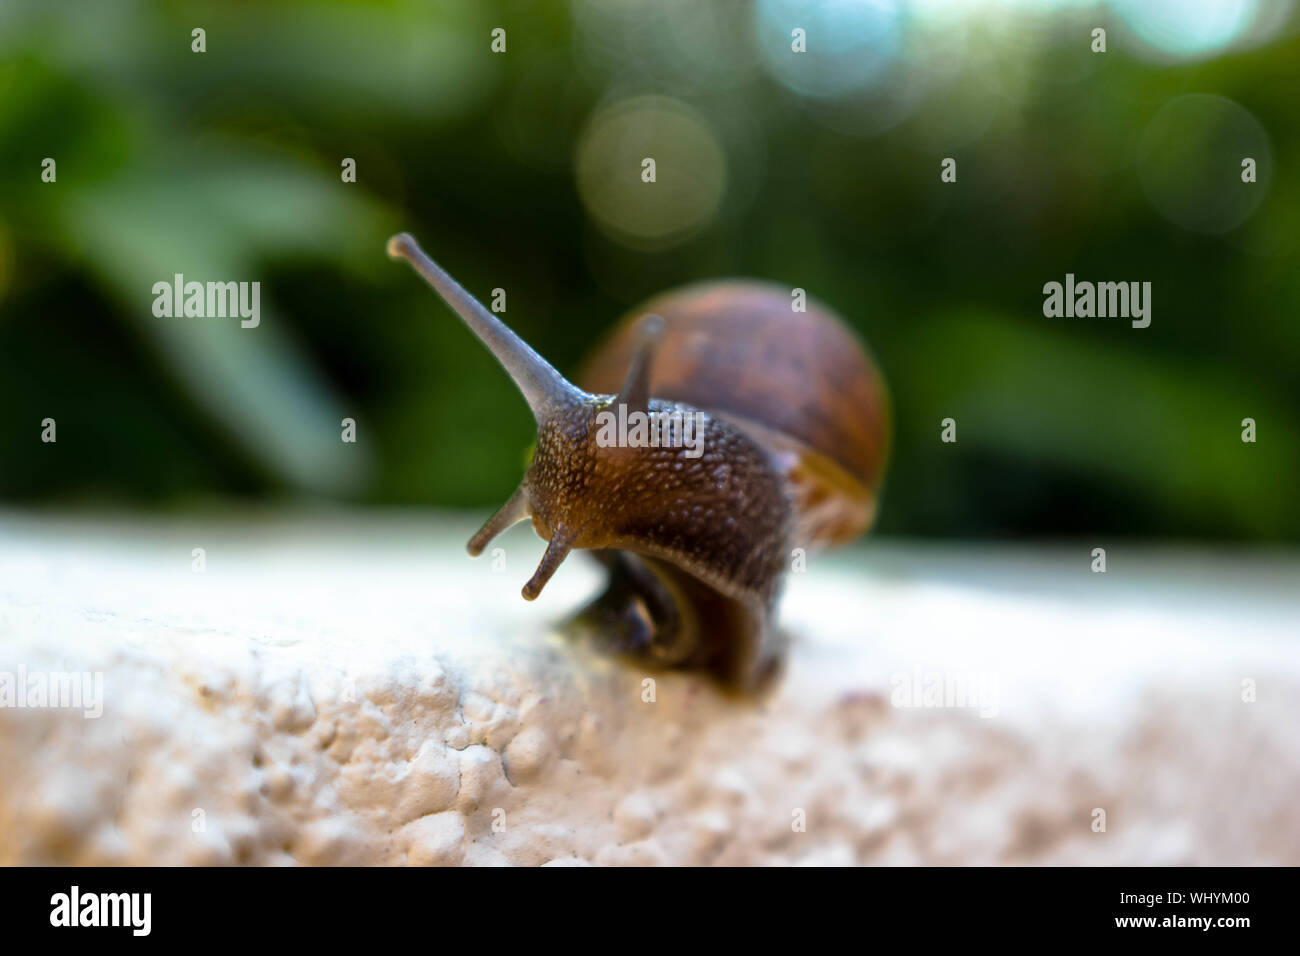 Surface Level Of Mollusk Stock Photo